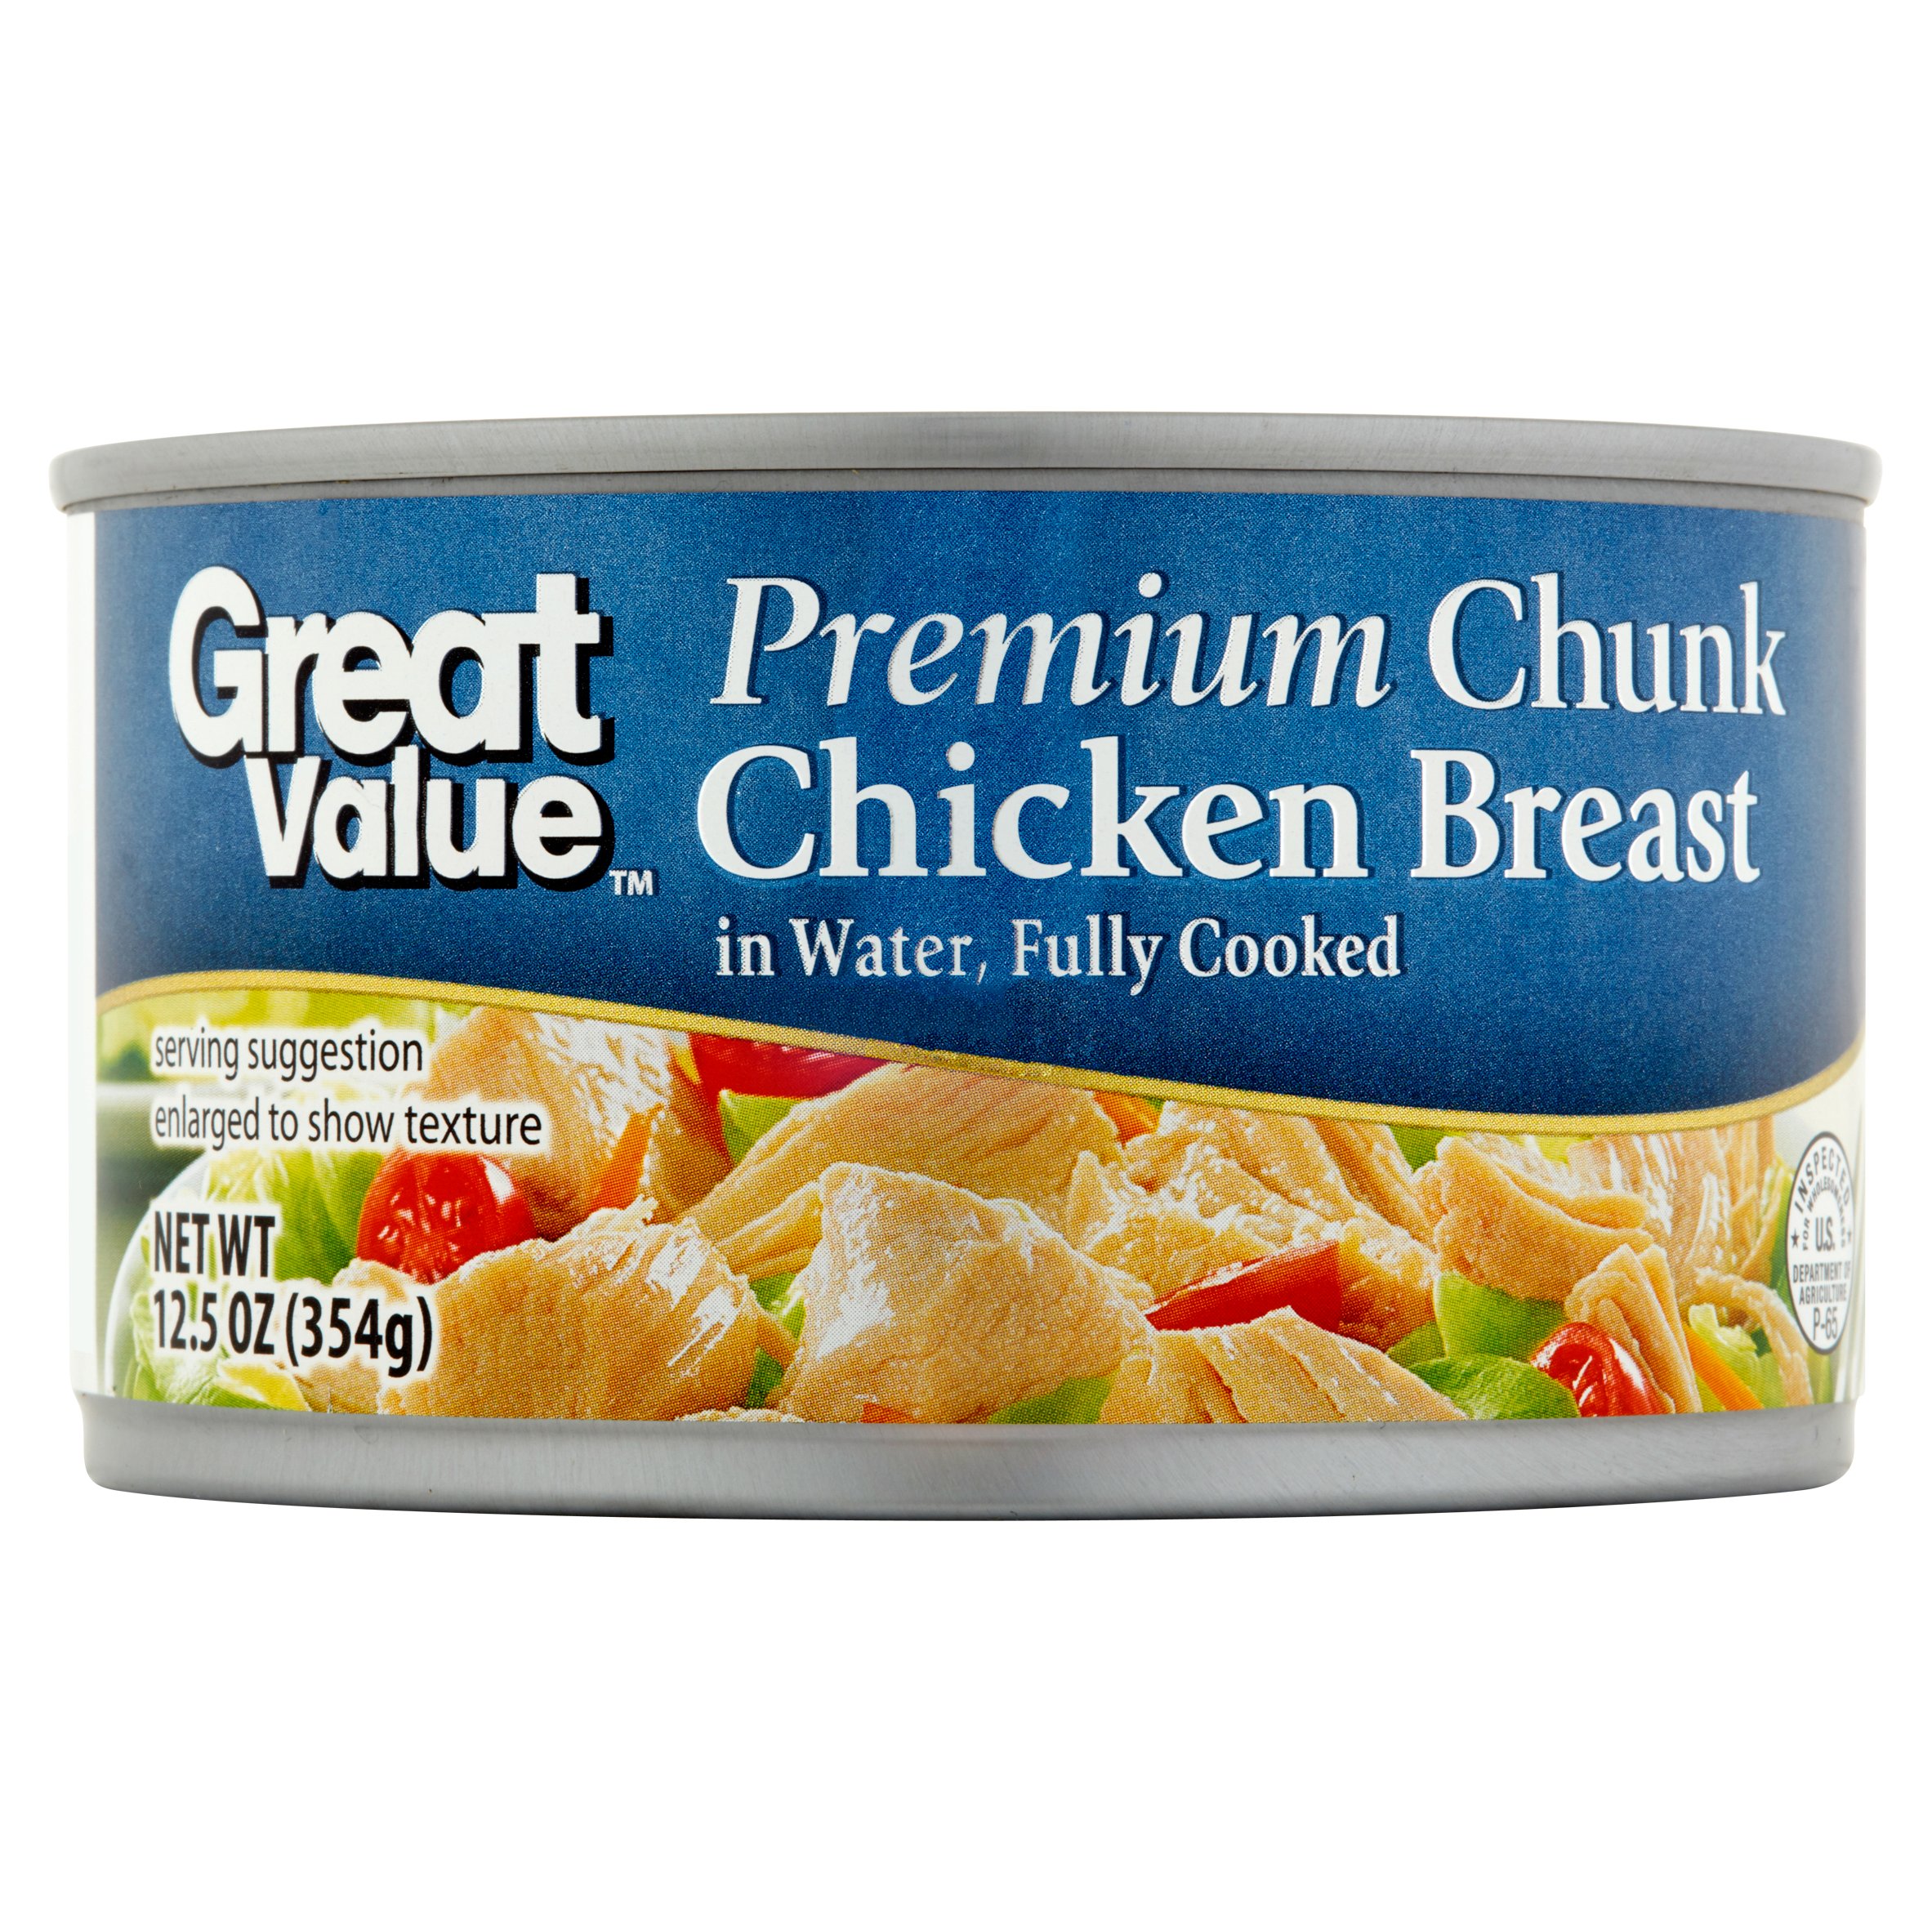 (2 Pack) Great Value Premium Chunk Chicken Breast in Water, 12.5 Oz